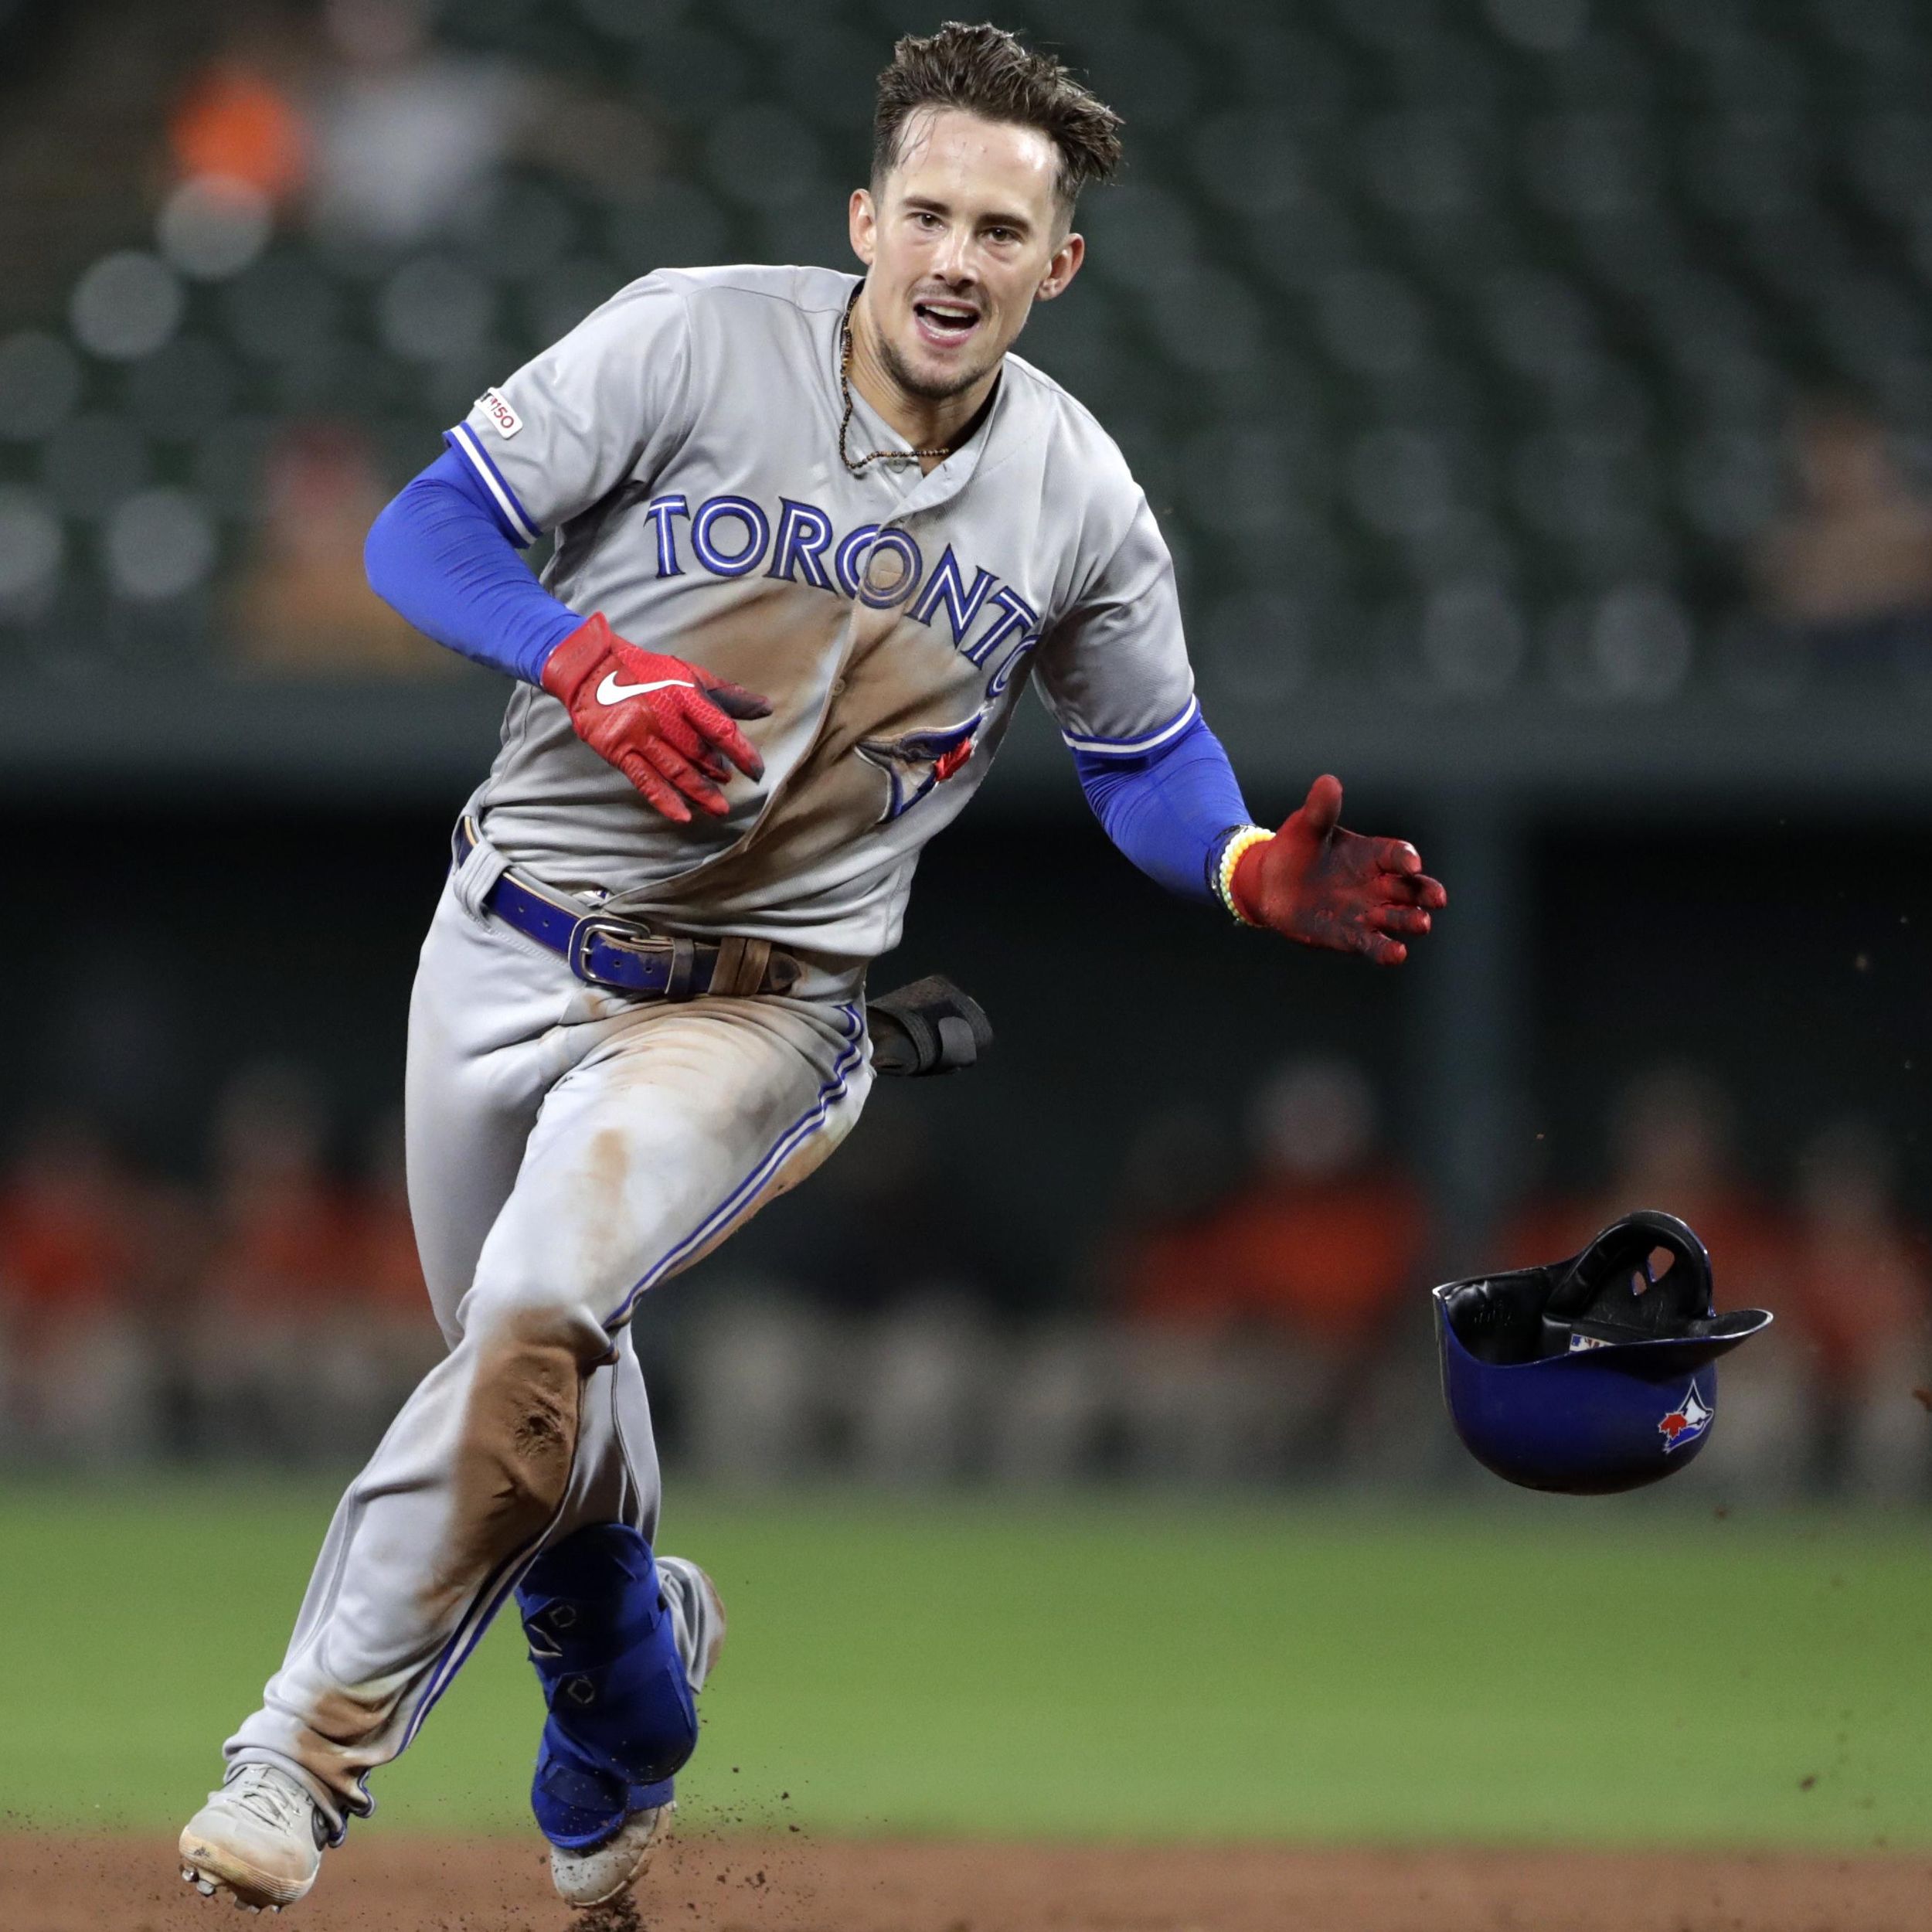 MLB roundup: Cavan Biggio hits for cycle, joins father in exclusive club